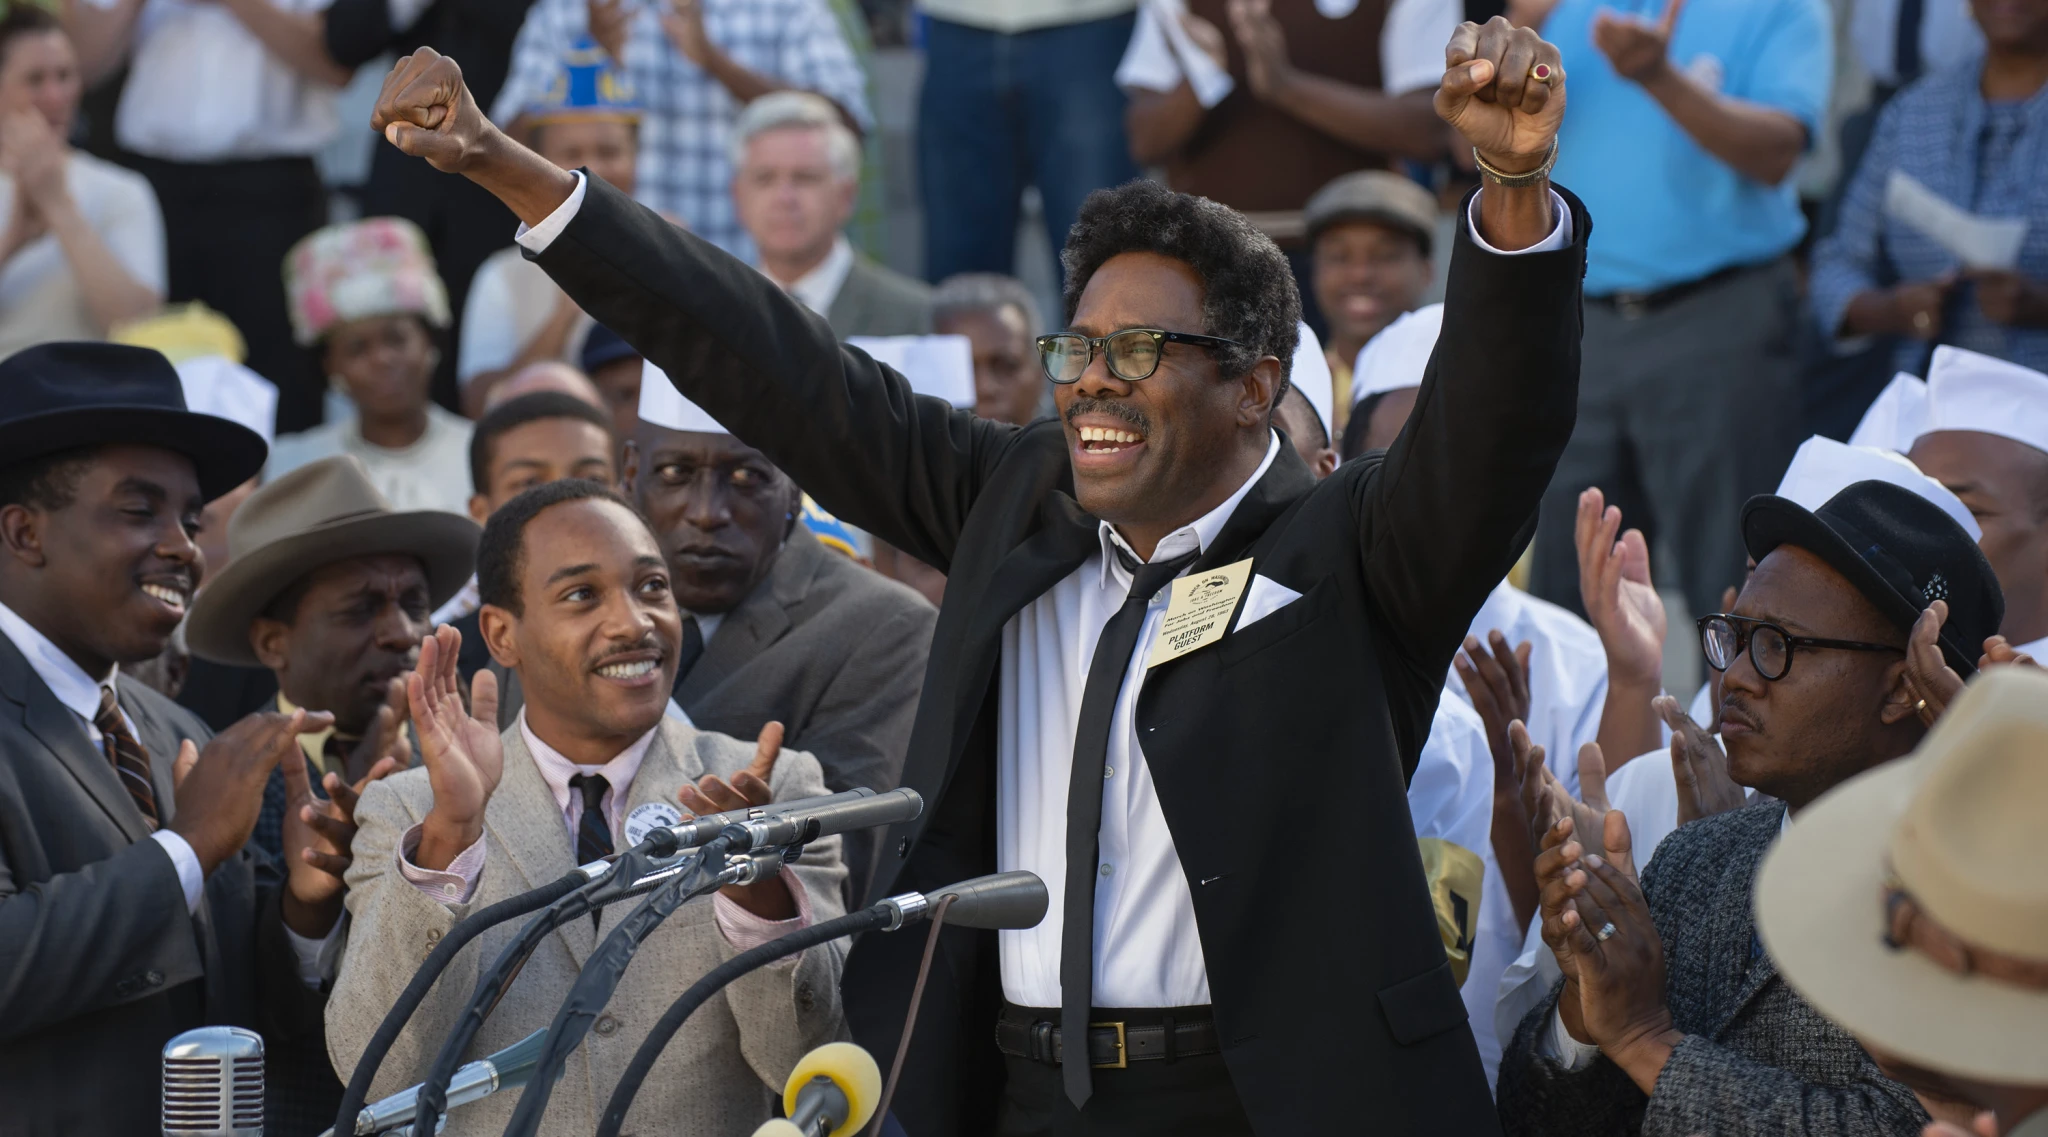 'Rustin' First Look: Civil Rights Biopic Is 'Important Reminder,' Says Writer Dustin Lance Black